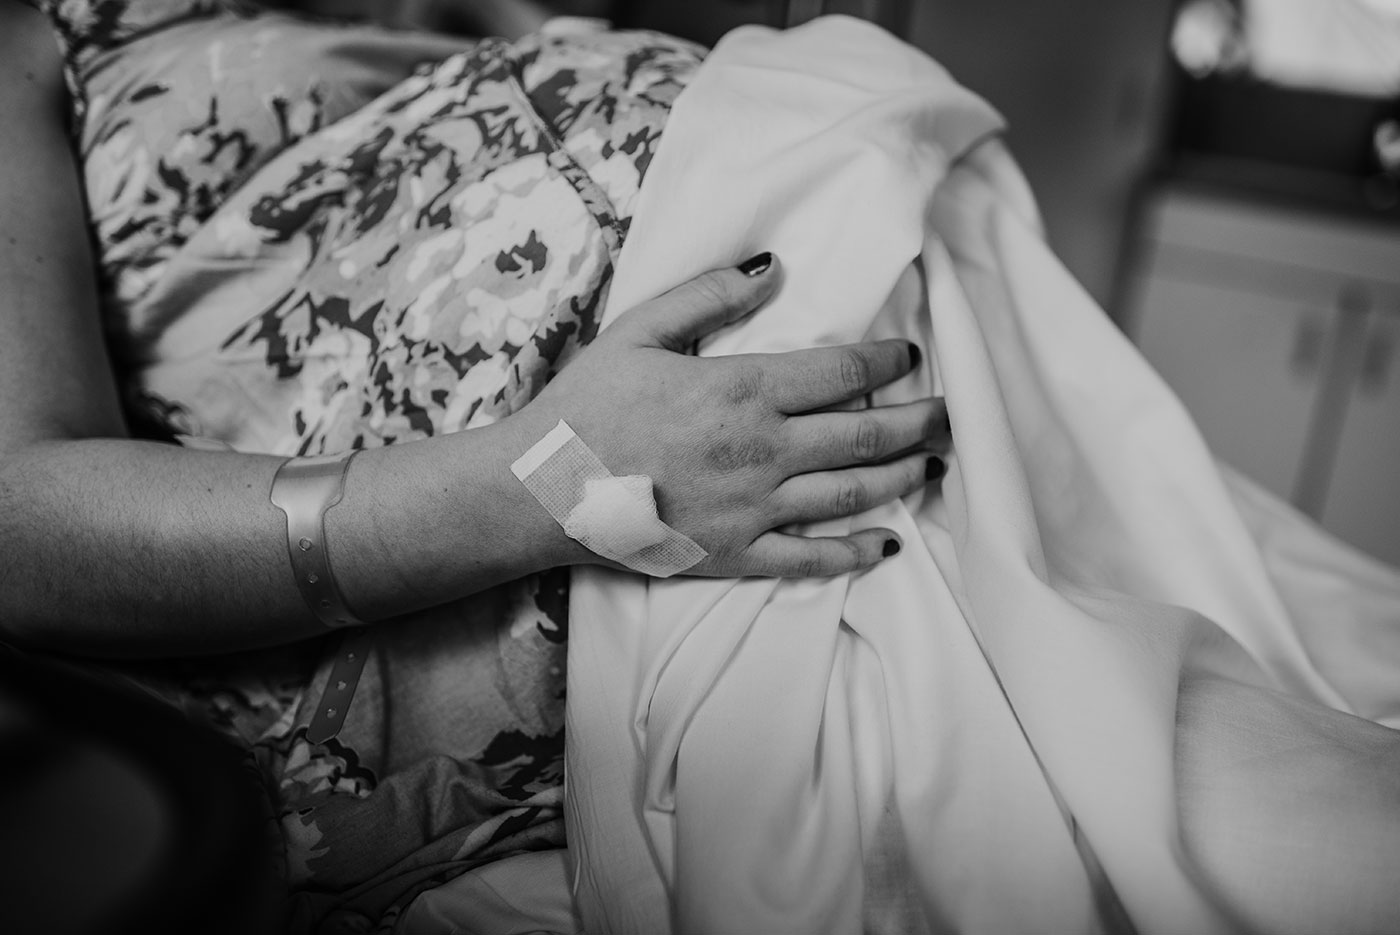 mom's hand on her stomach during a contraction during birth